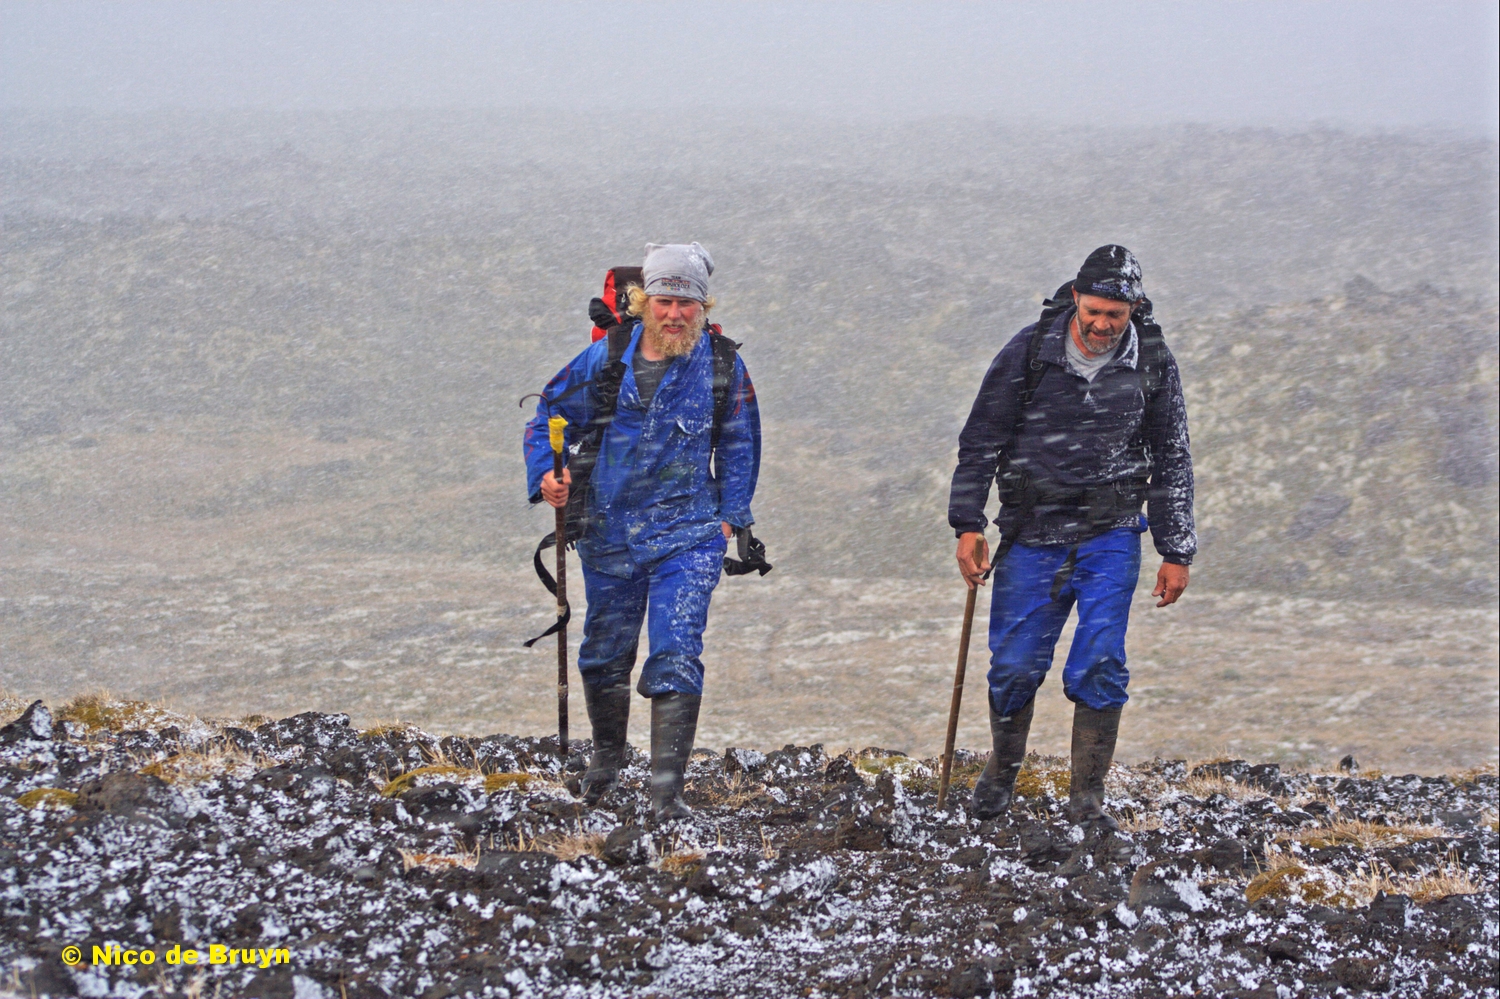  Chris Oosthuizen and Martin Haupt in a snow storm, on route to do some seal work at Marion Island. Photo credit: Nico de Bruyn&nbsp; 